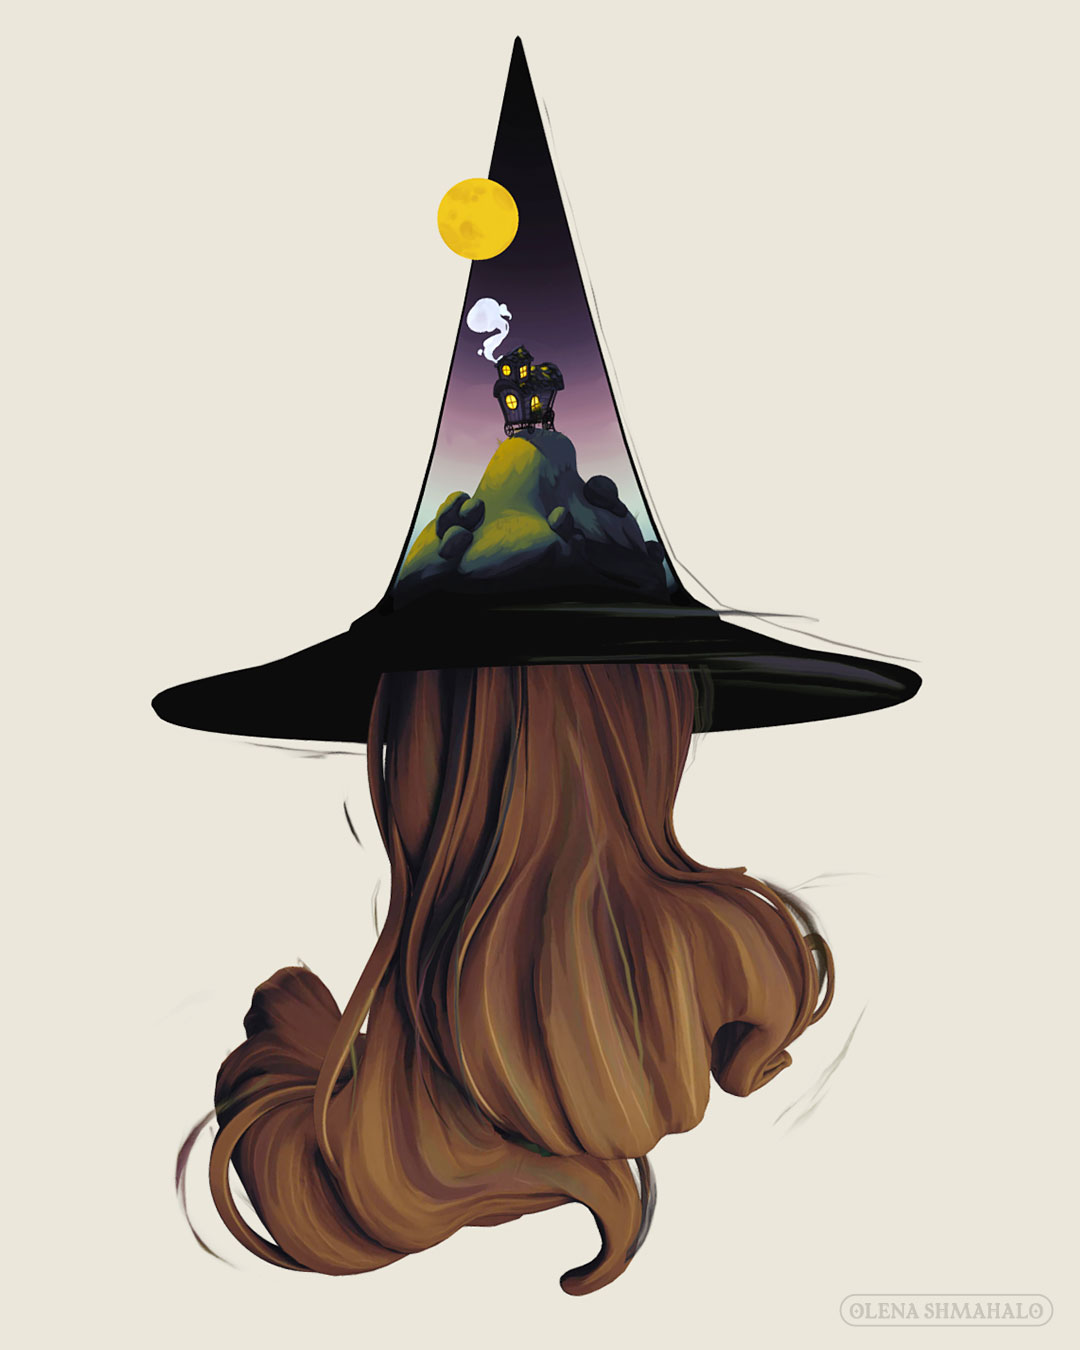 Angle of a painted 3D sculpture: the back of a girl with brown hair wearing a witch hat. The top of the hat is a cutaway diorama of a landscape: a shepherd's hut on a hill.